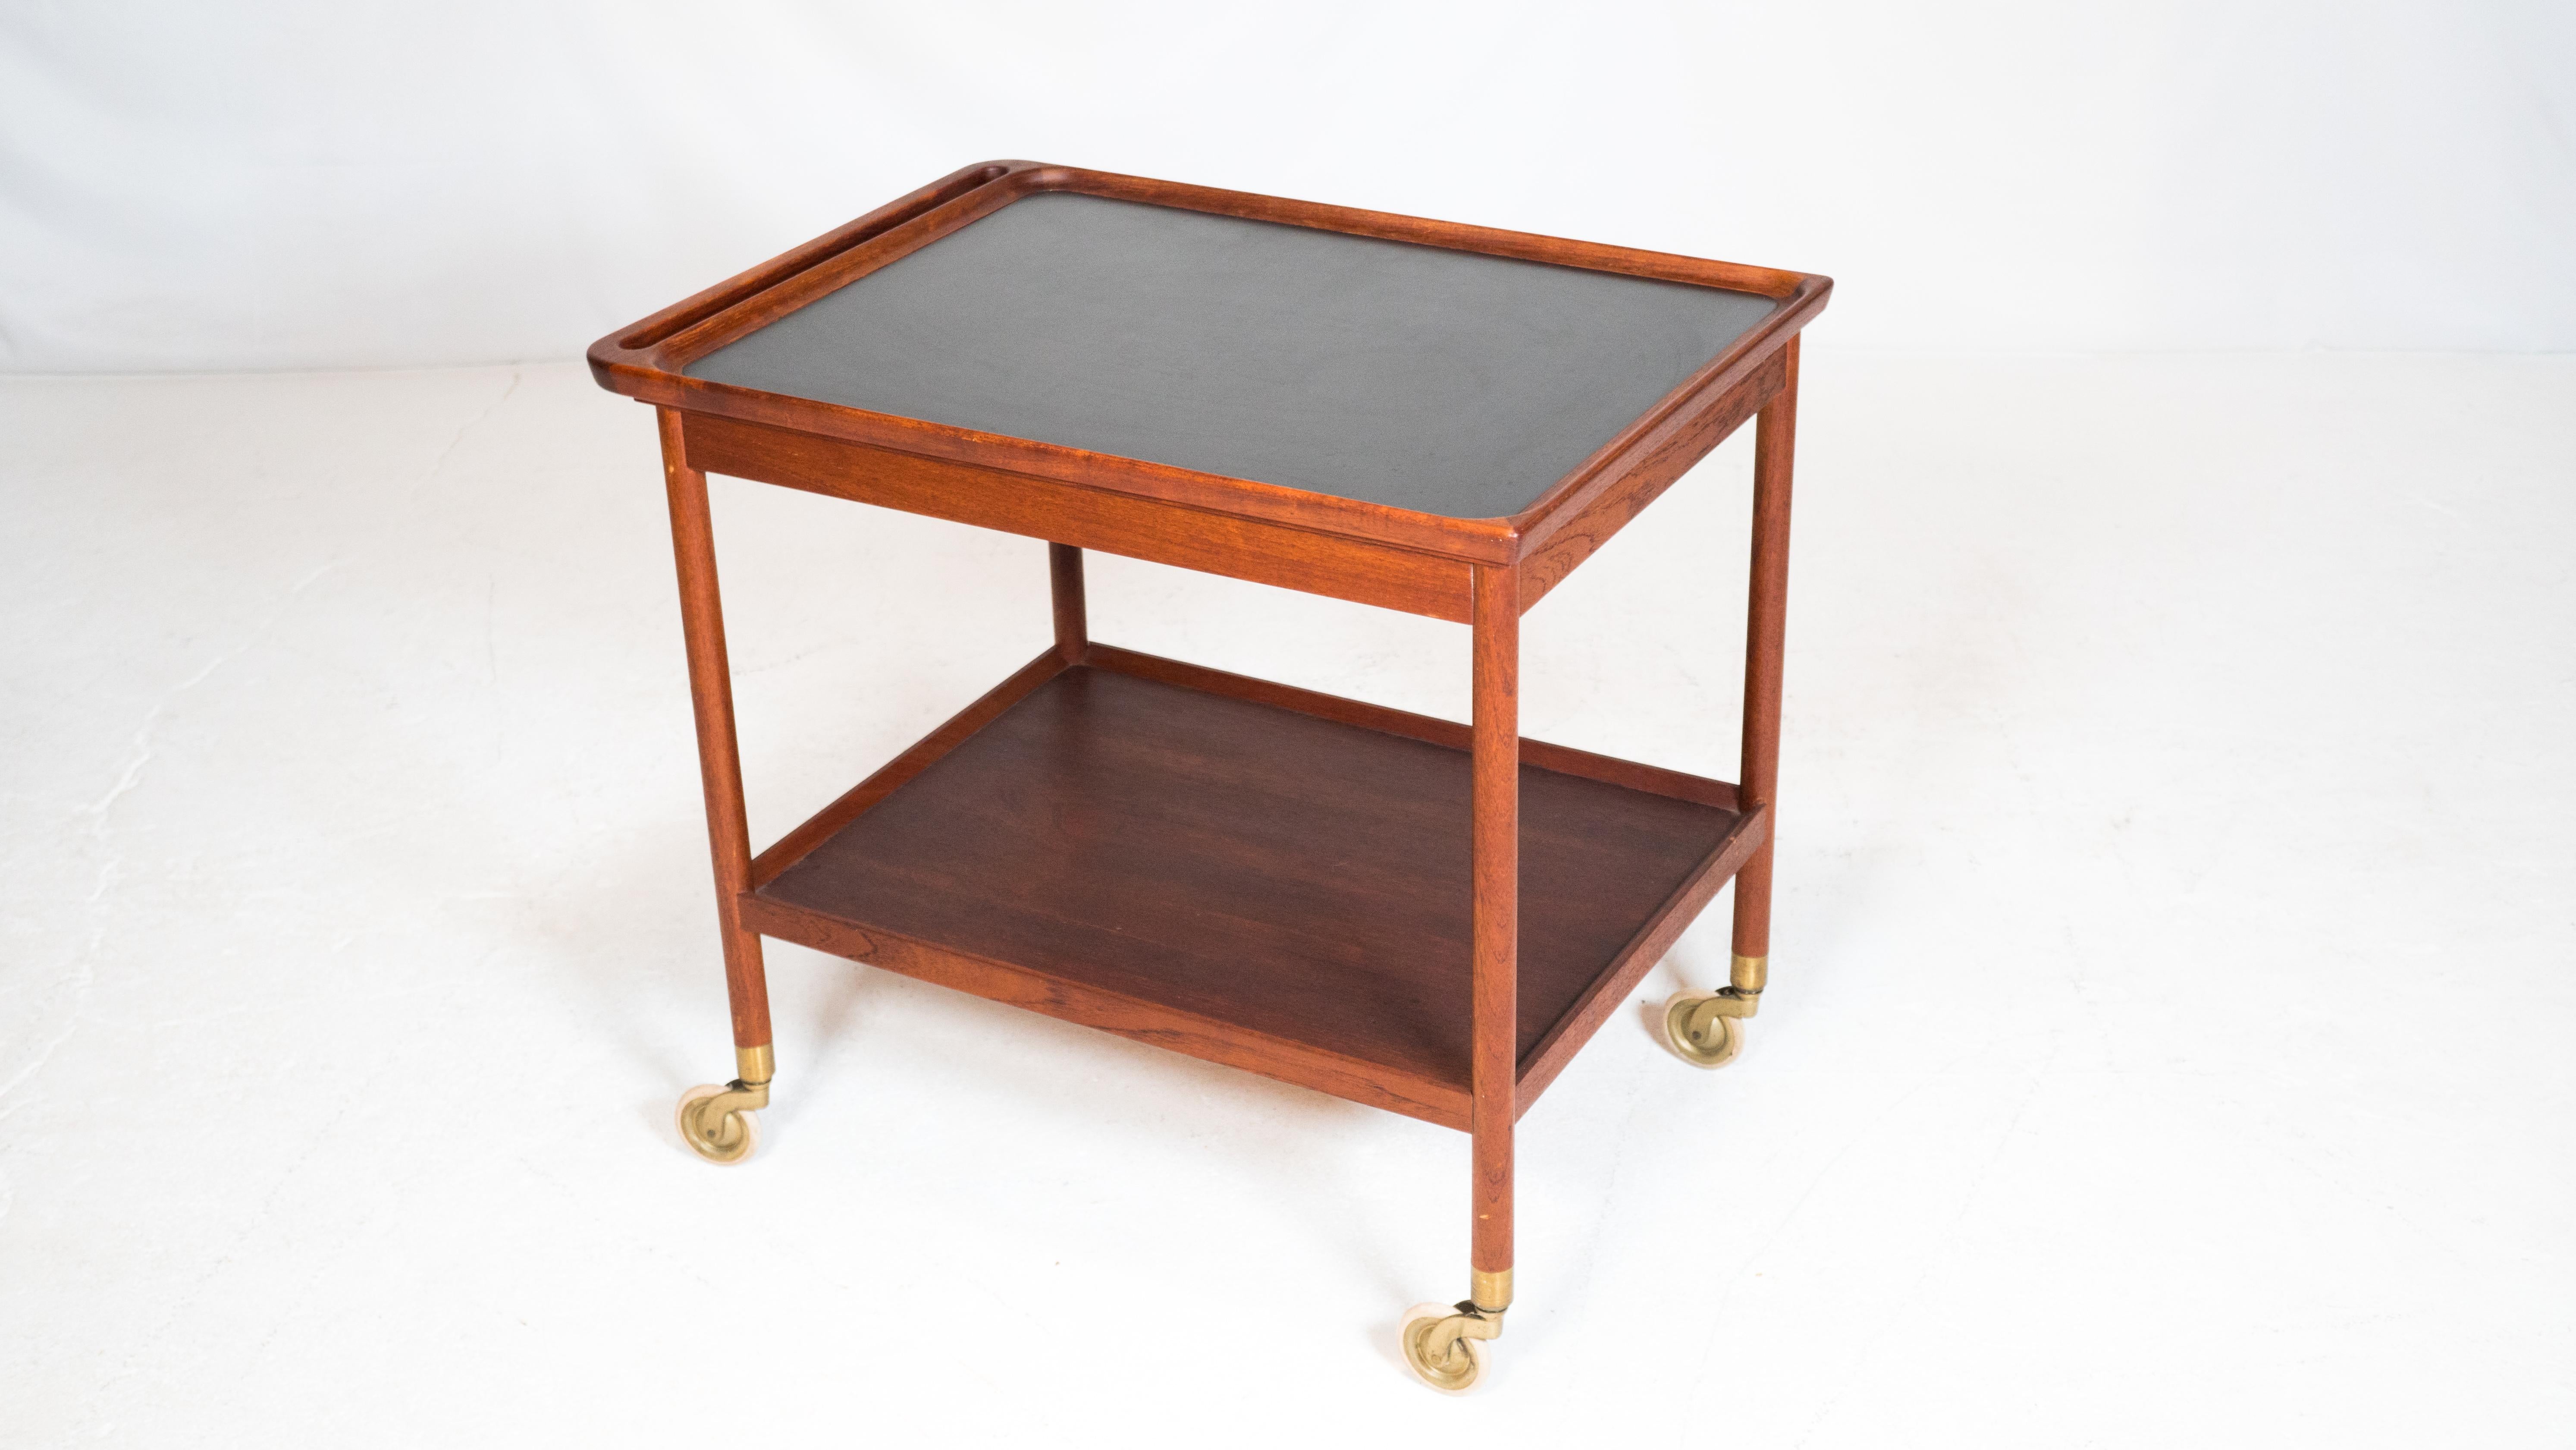 Danish modern teak bar cart or serving trolly by Ludvig Pontoppidan, circa 1960s. Old-growth teak construction with rich woodgrain details. Black laminate top, brass casters. Two tiered design with ample storage and seamless, integrated handle. Good